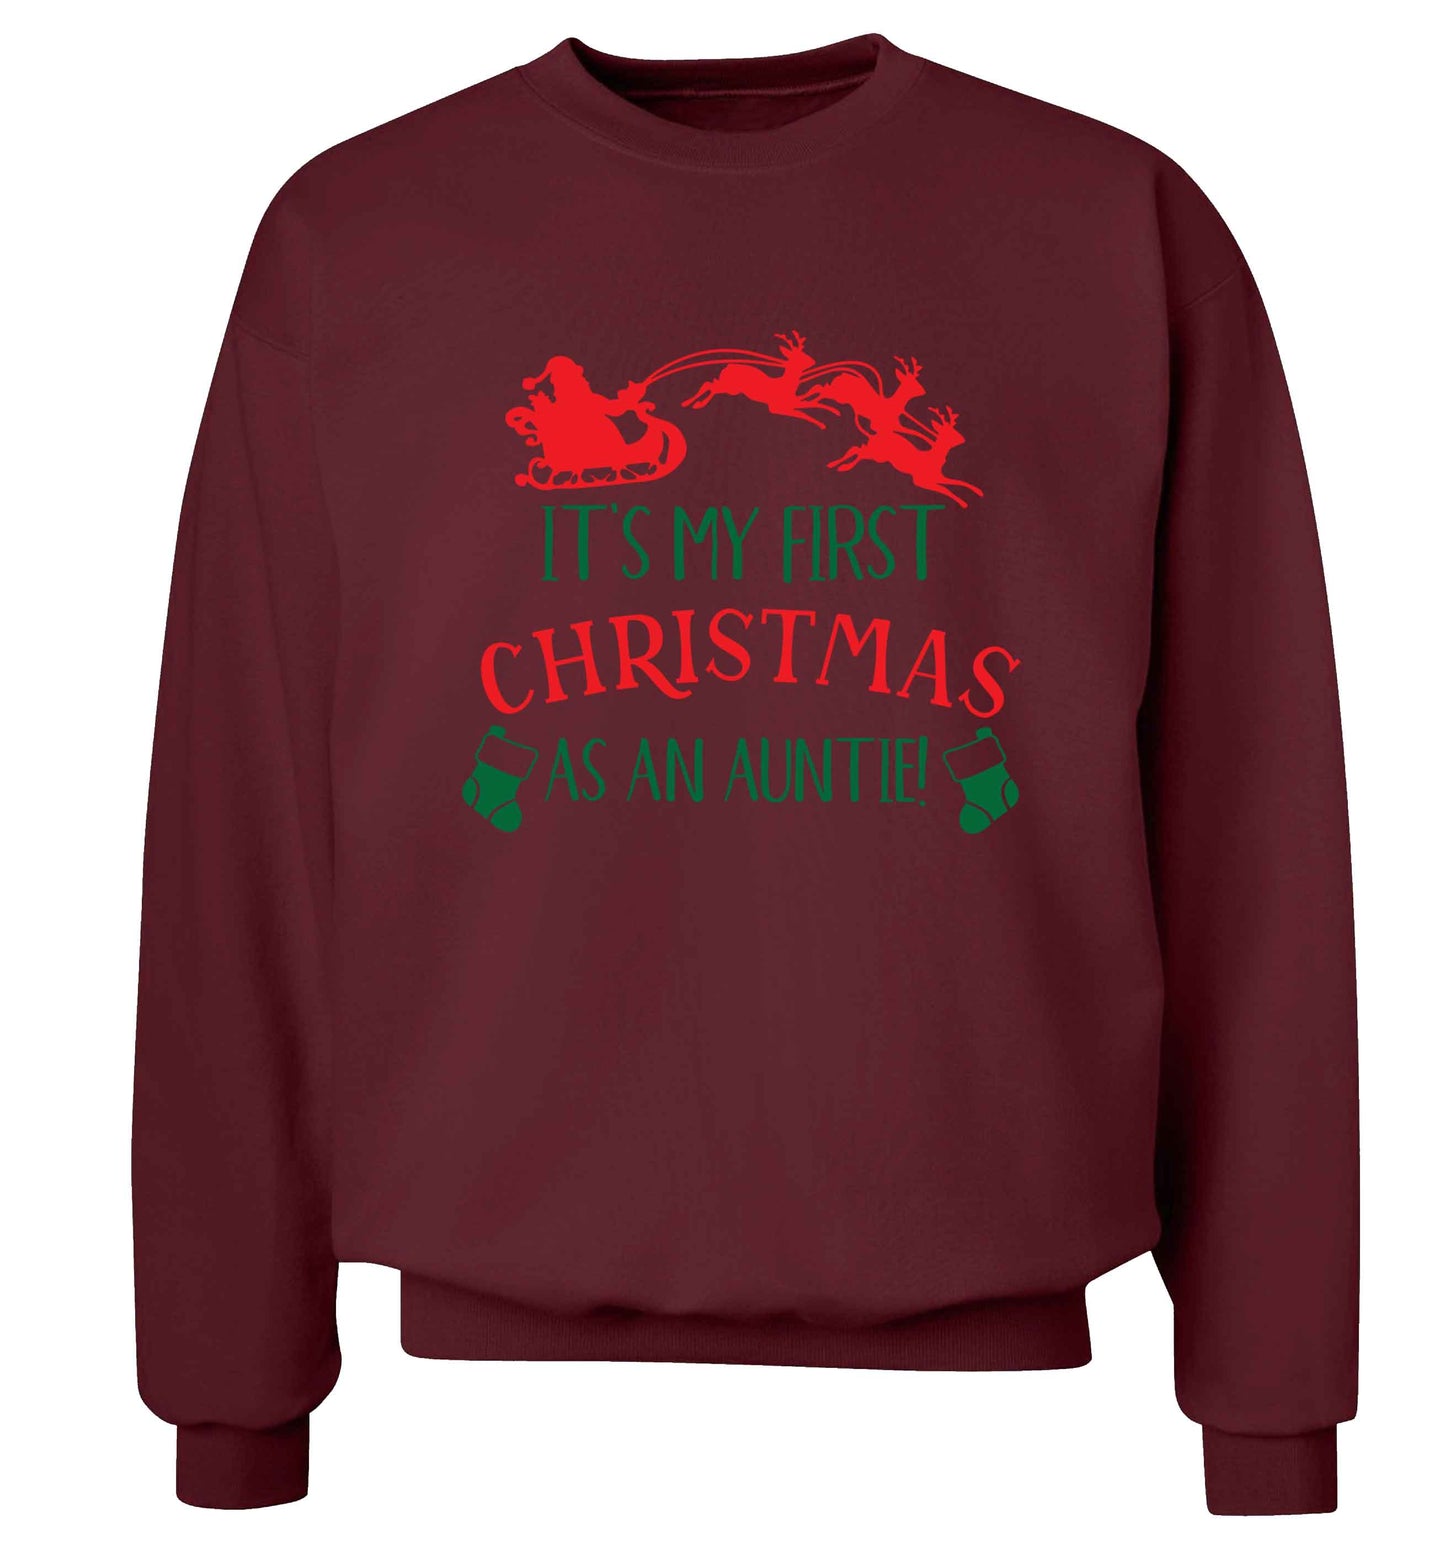 It's my first Christmas as an auntie! Adult's unisex maroon Sweater 2XL